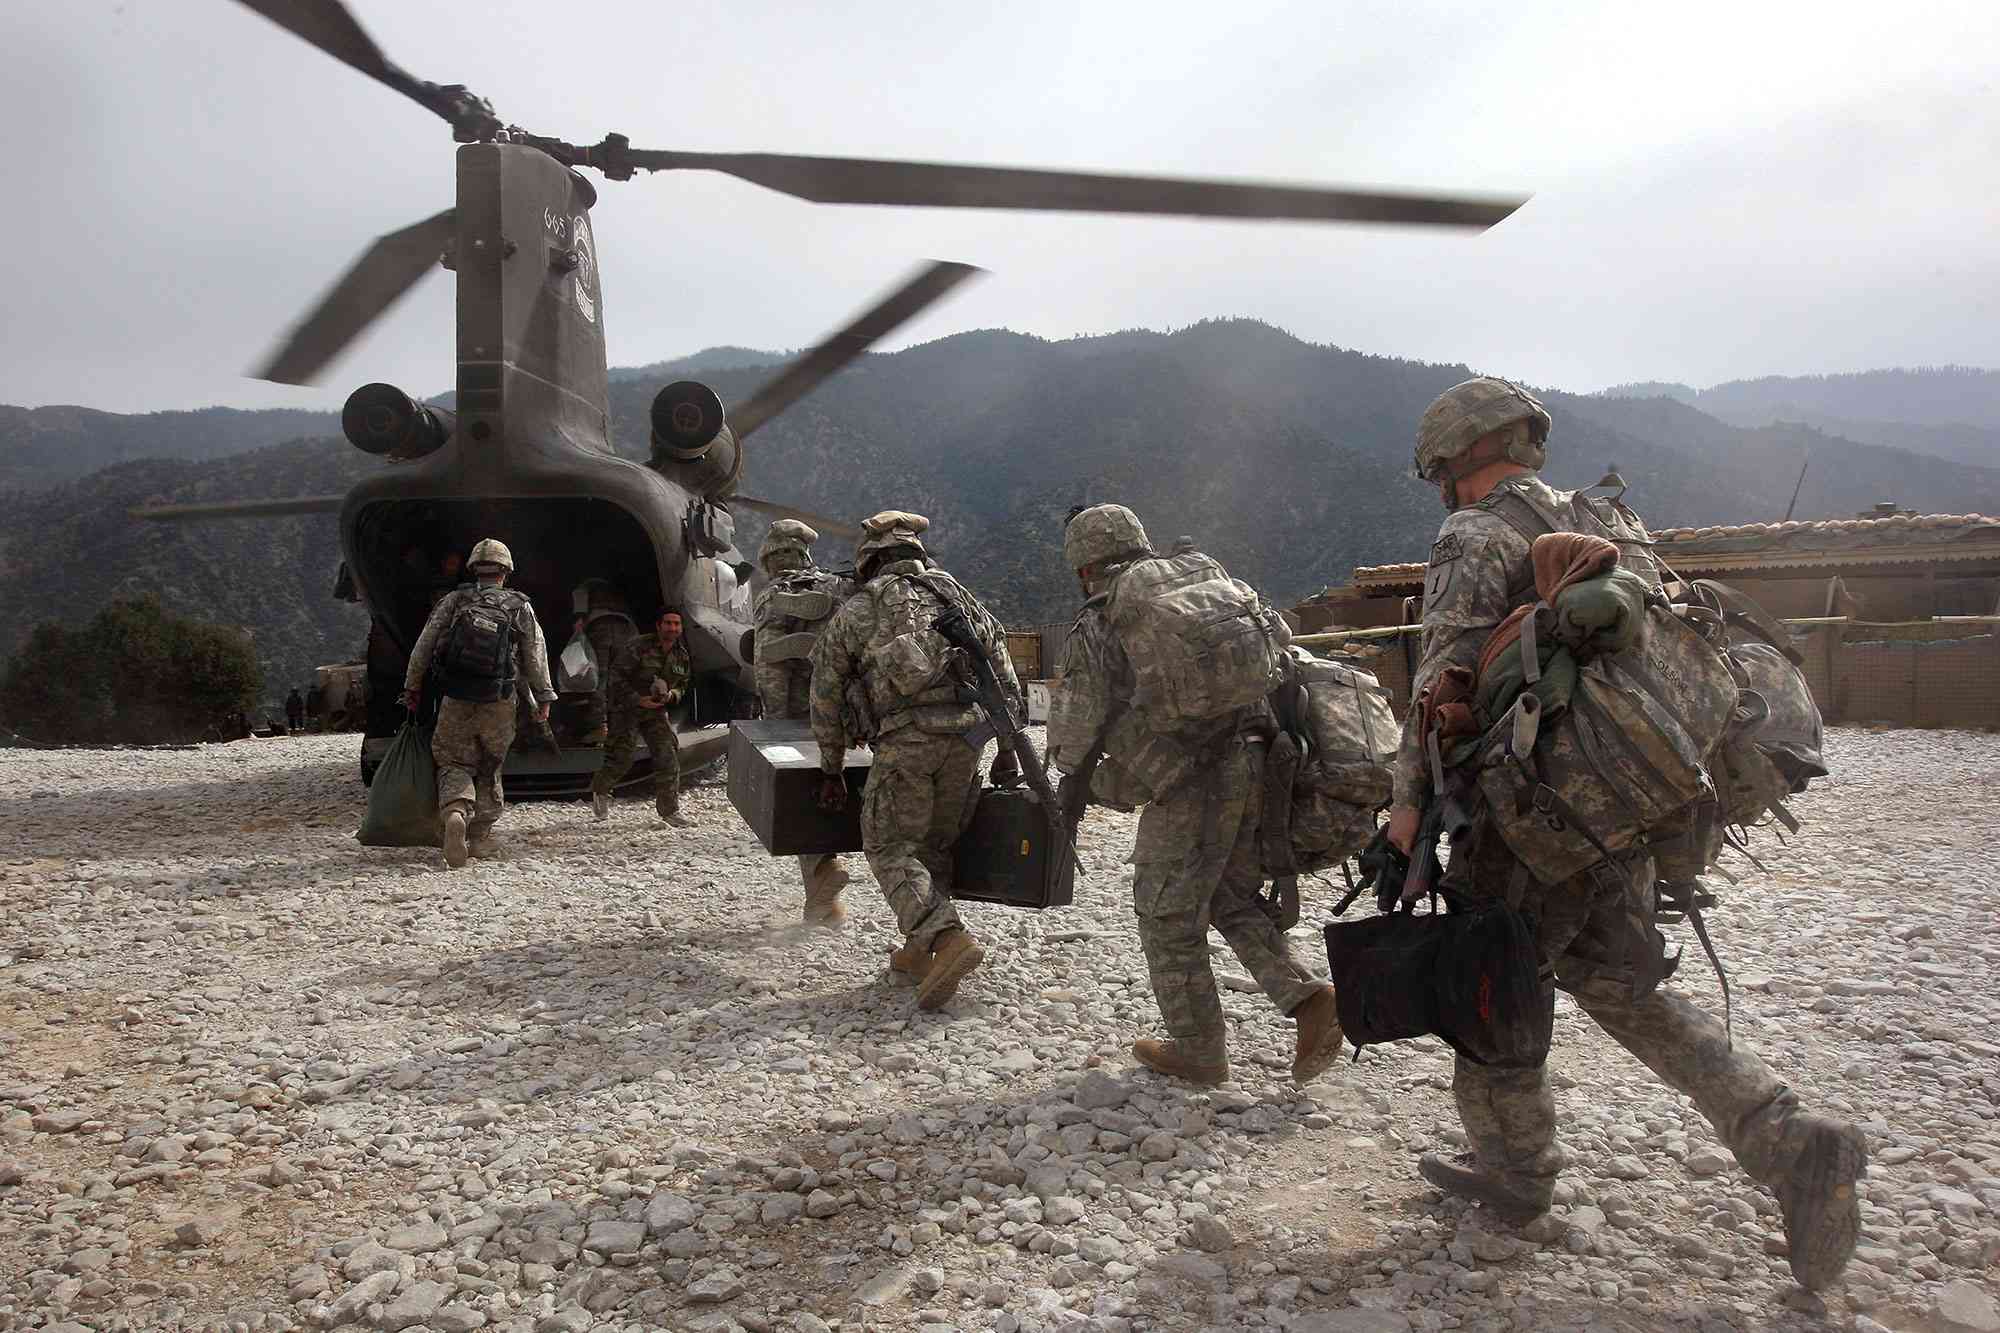 U.S. soldiers board an Army Chinook